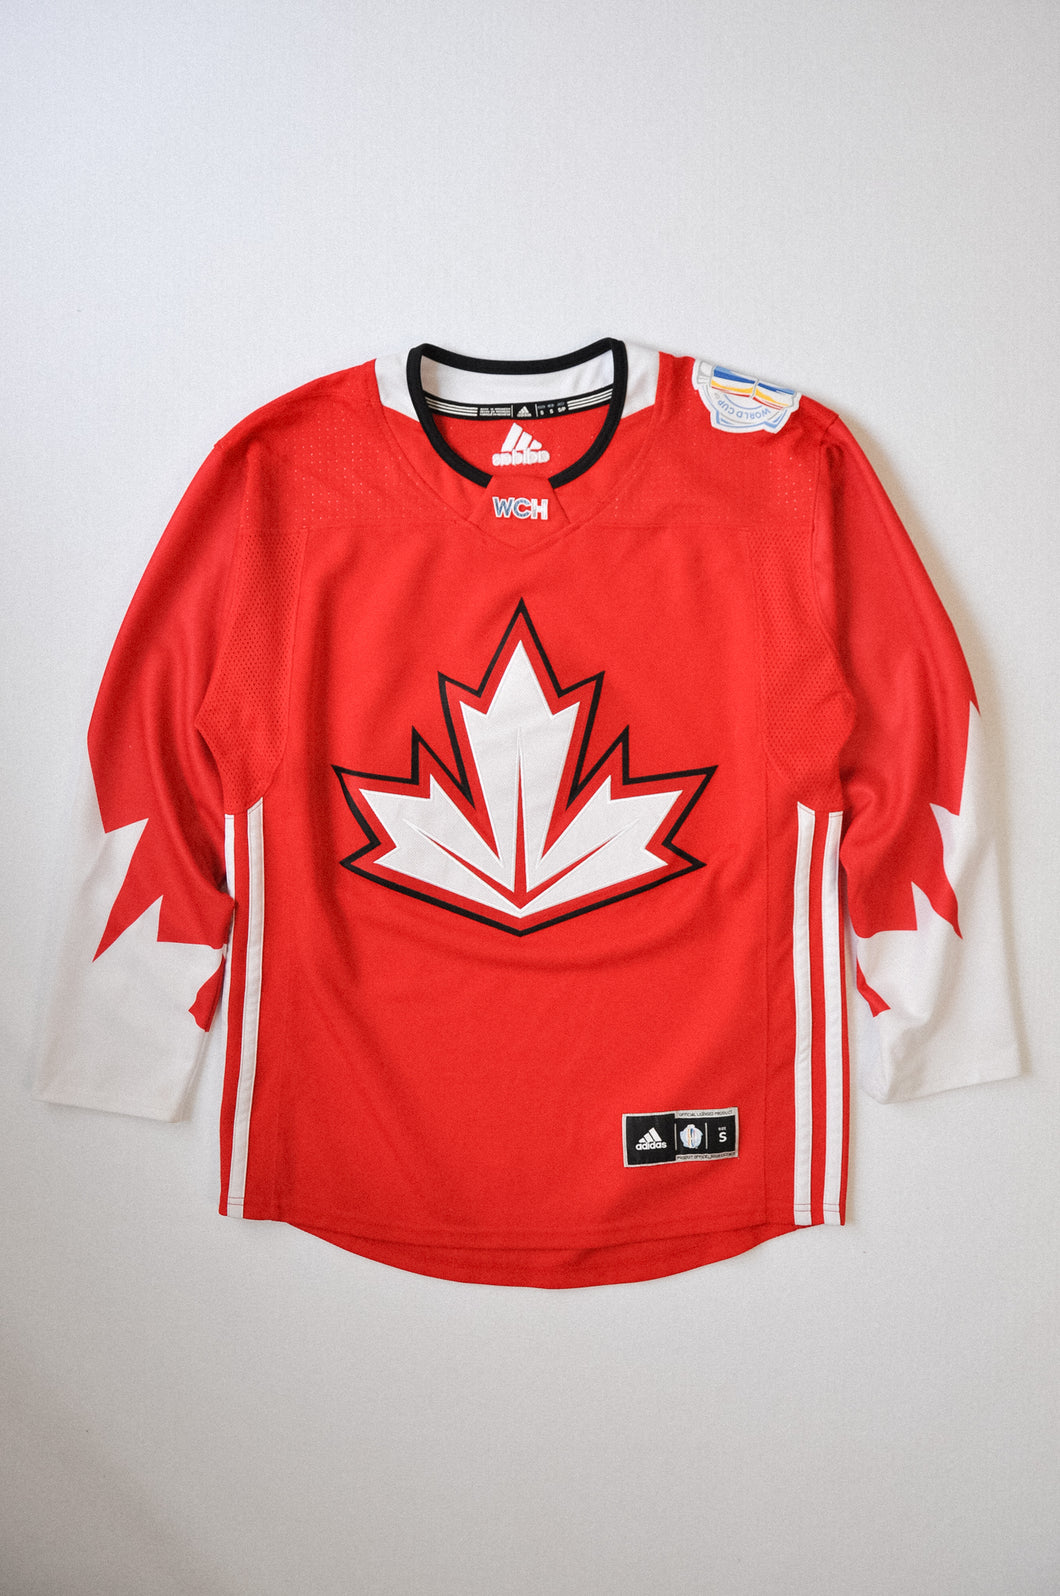 2016 World Cup of Hockey Adidas Jersey | Size S